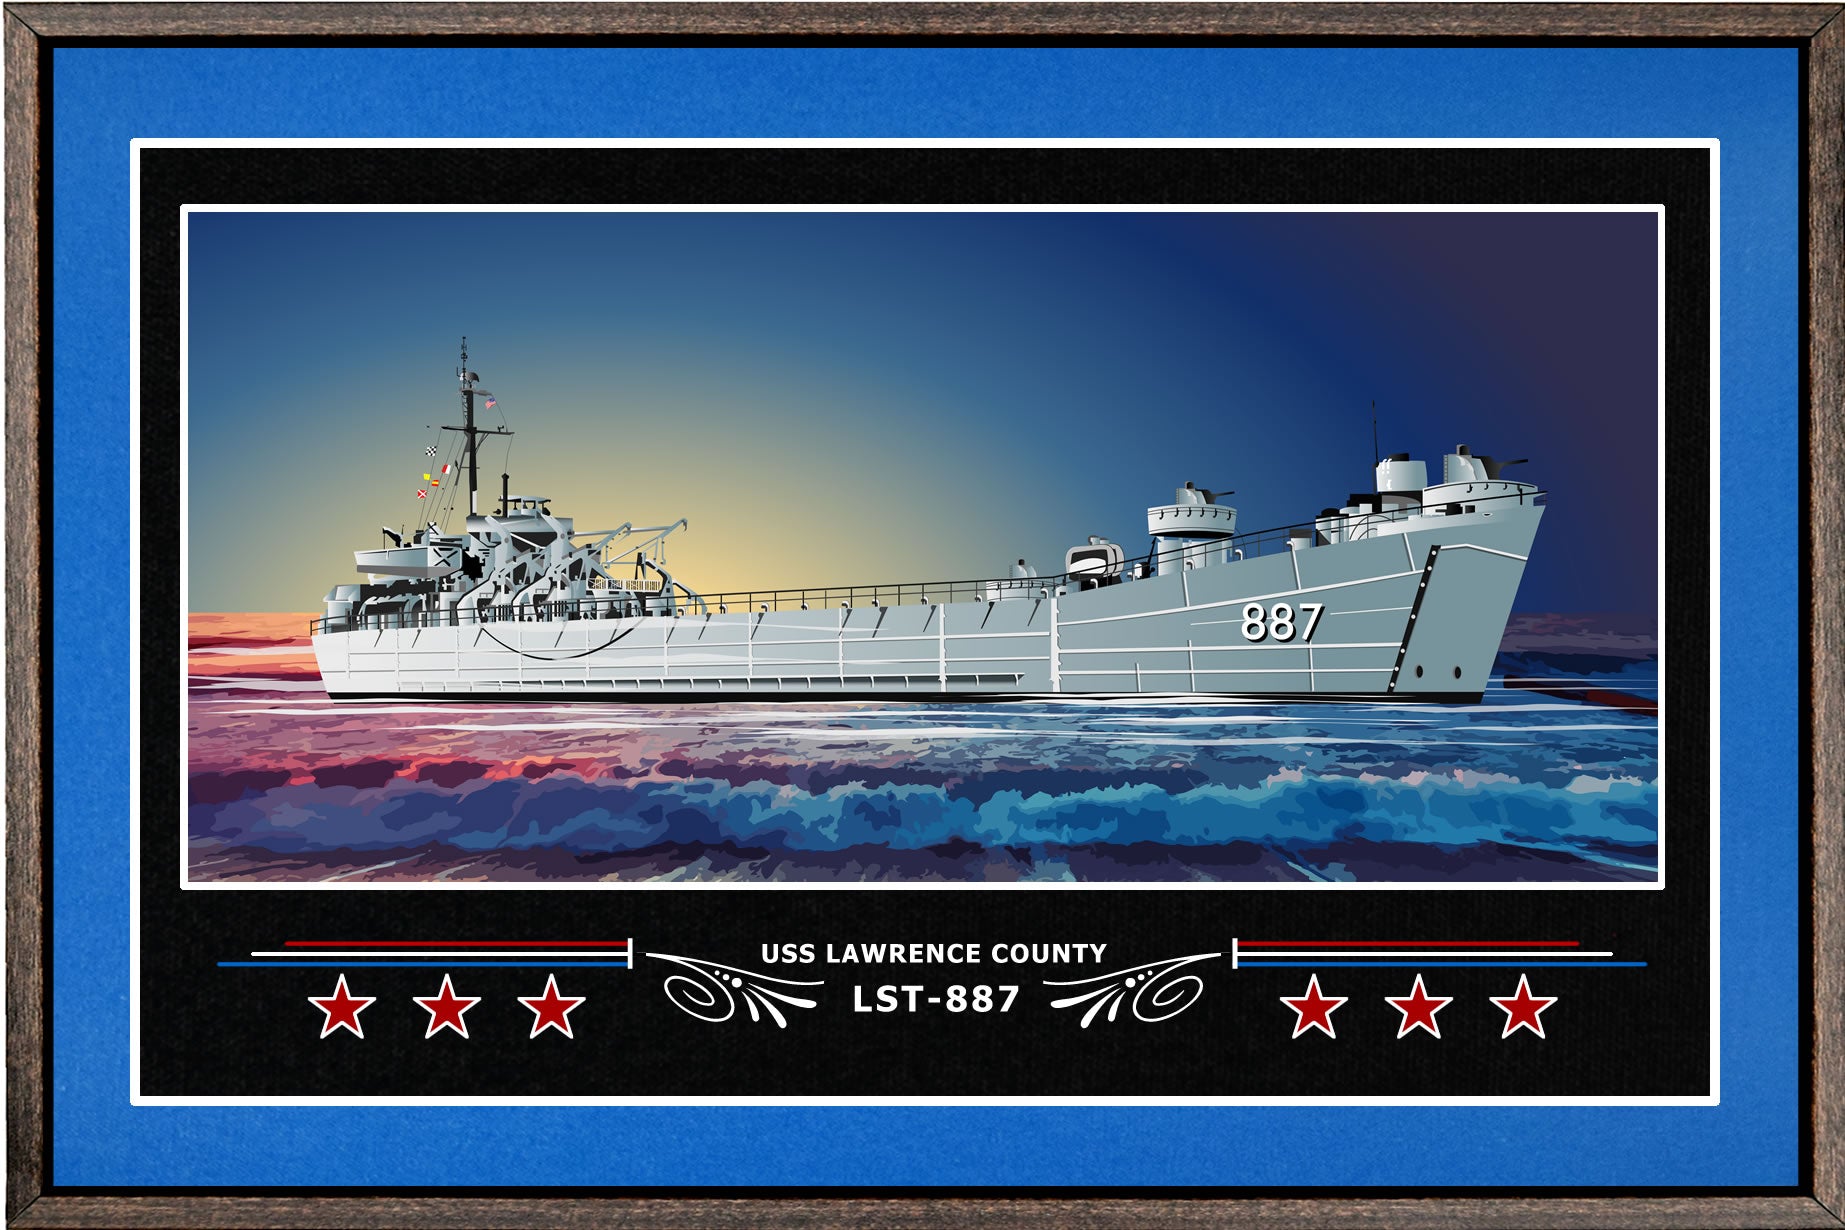 USS LAWRENCE COUNTY LST 887 BOX FRAMED CANVAS ART BLUE